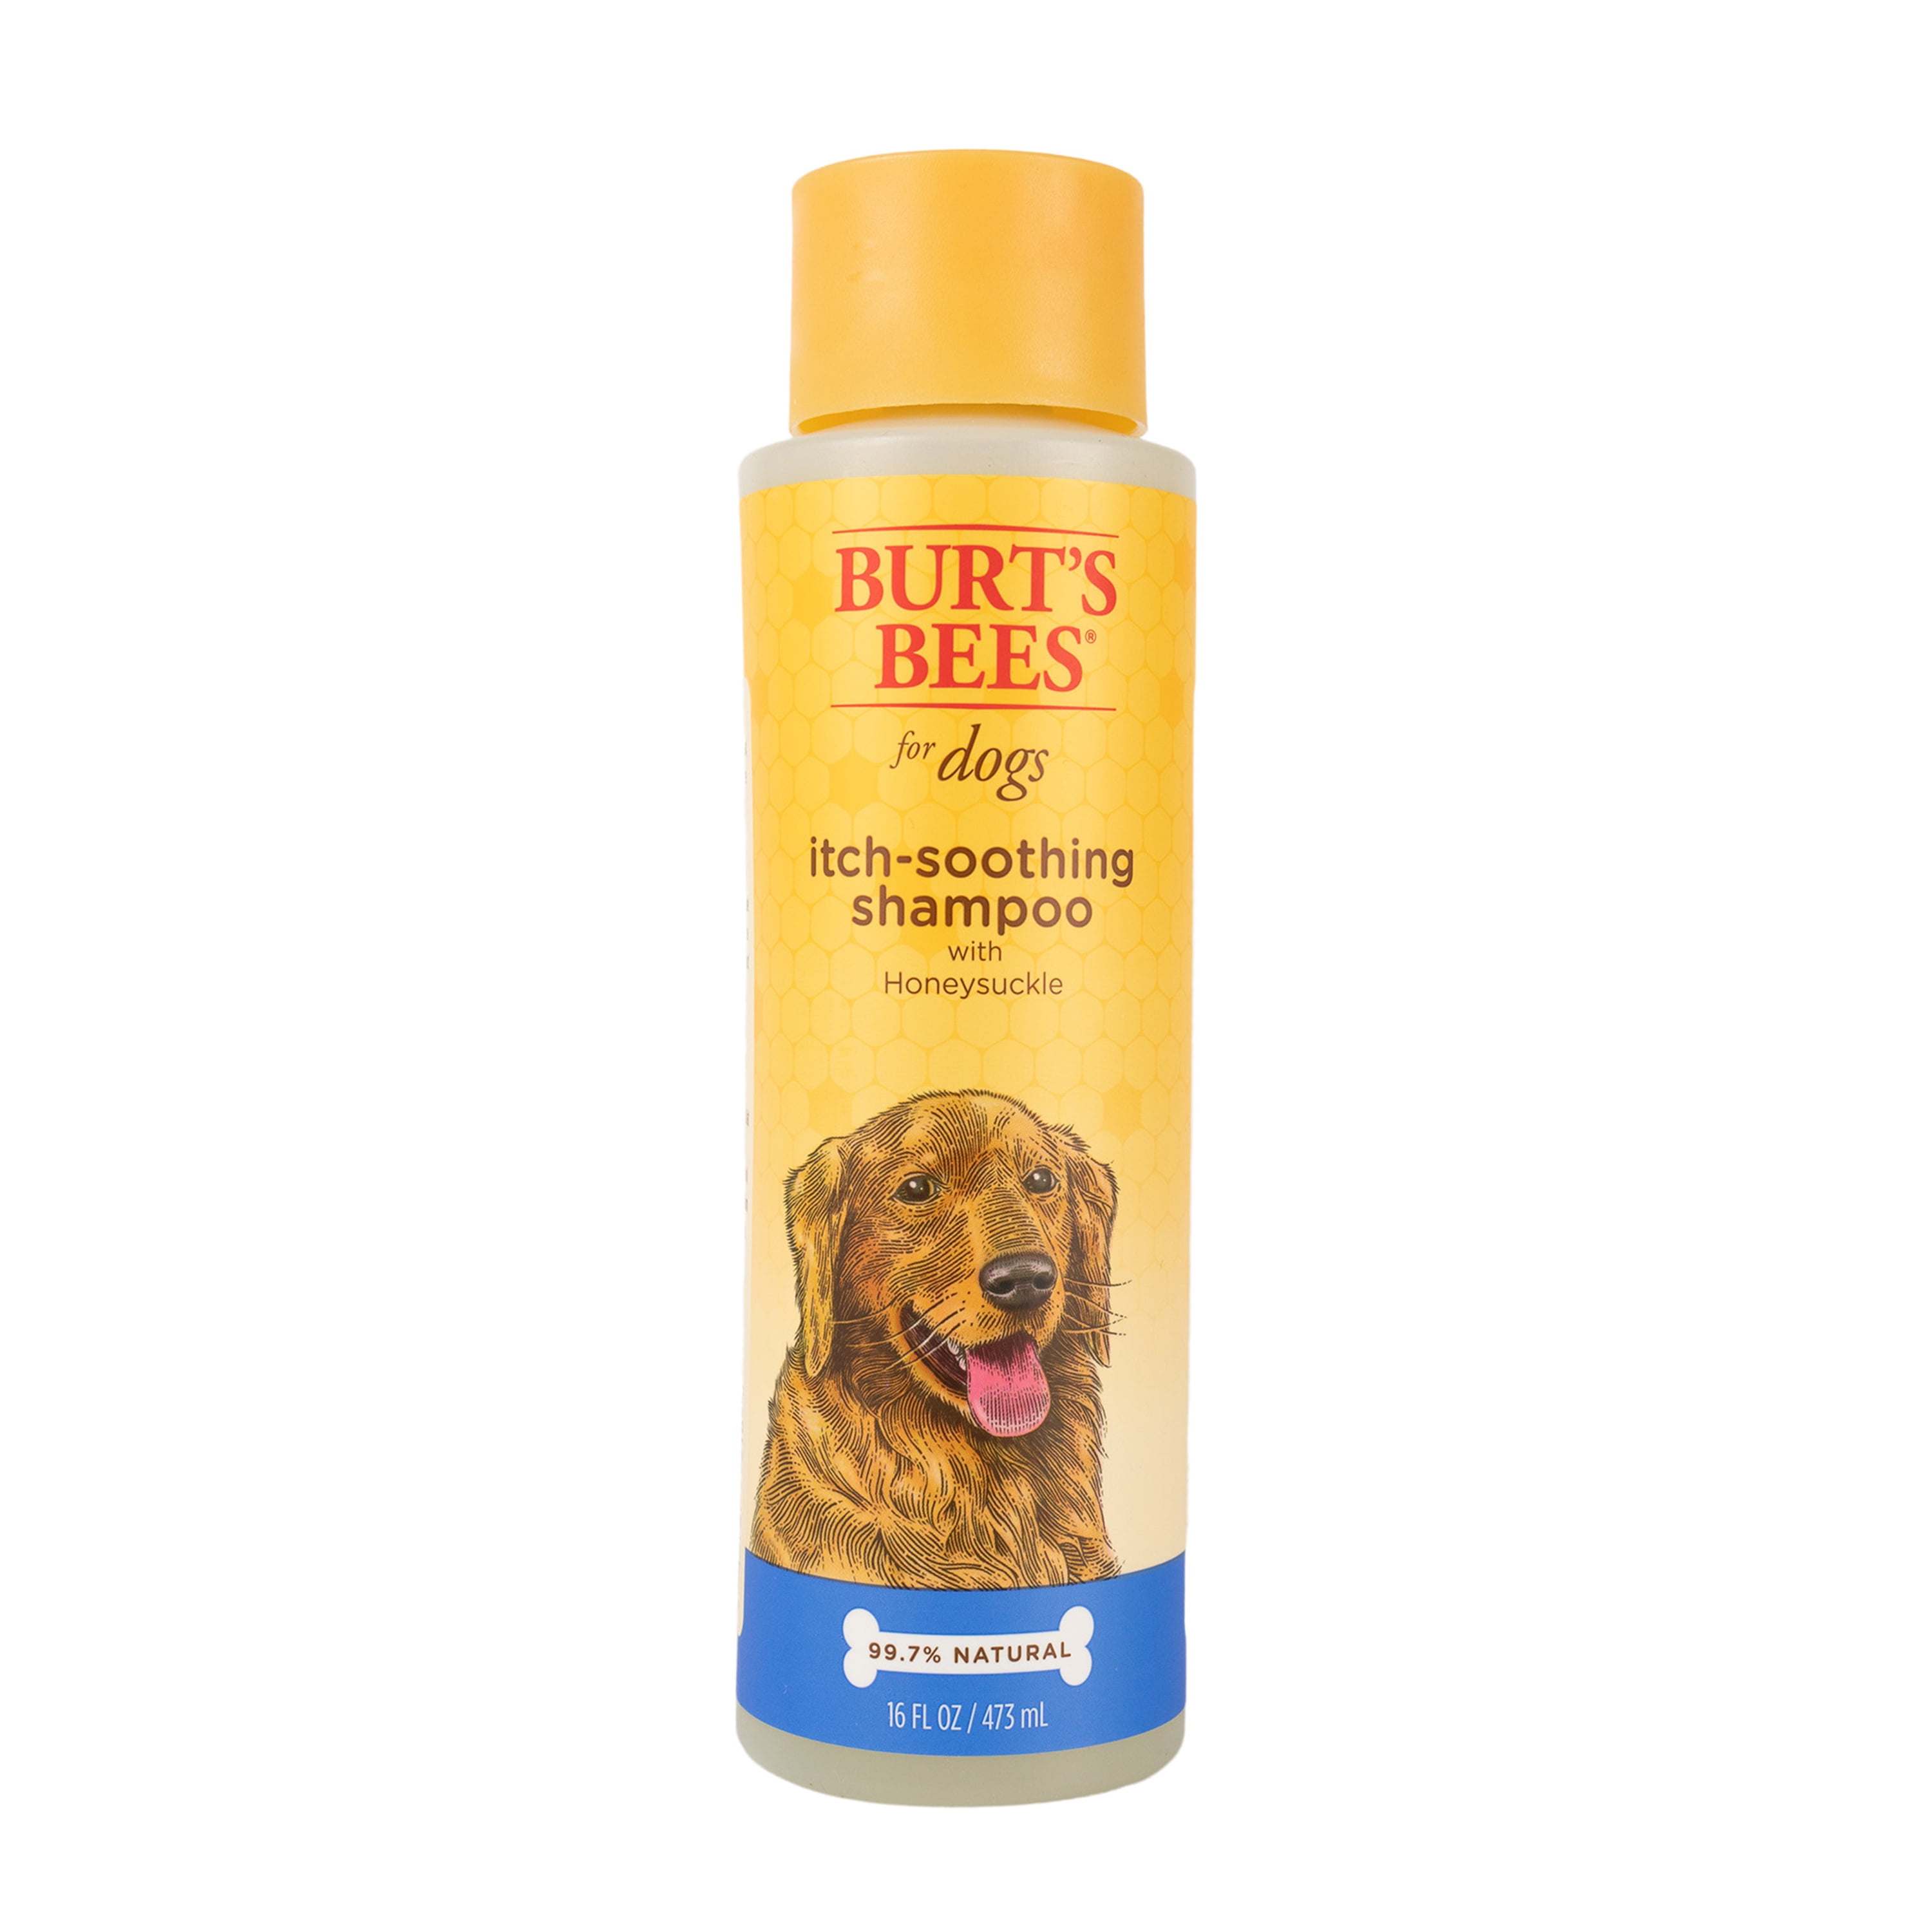 Burt's Bees Itch Soothing Shampoo with 